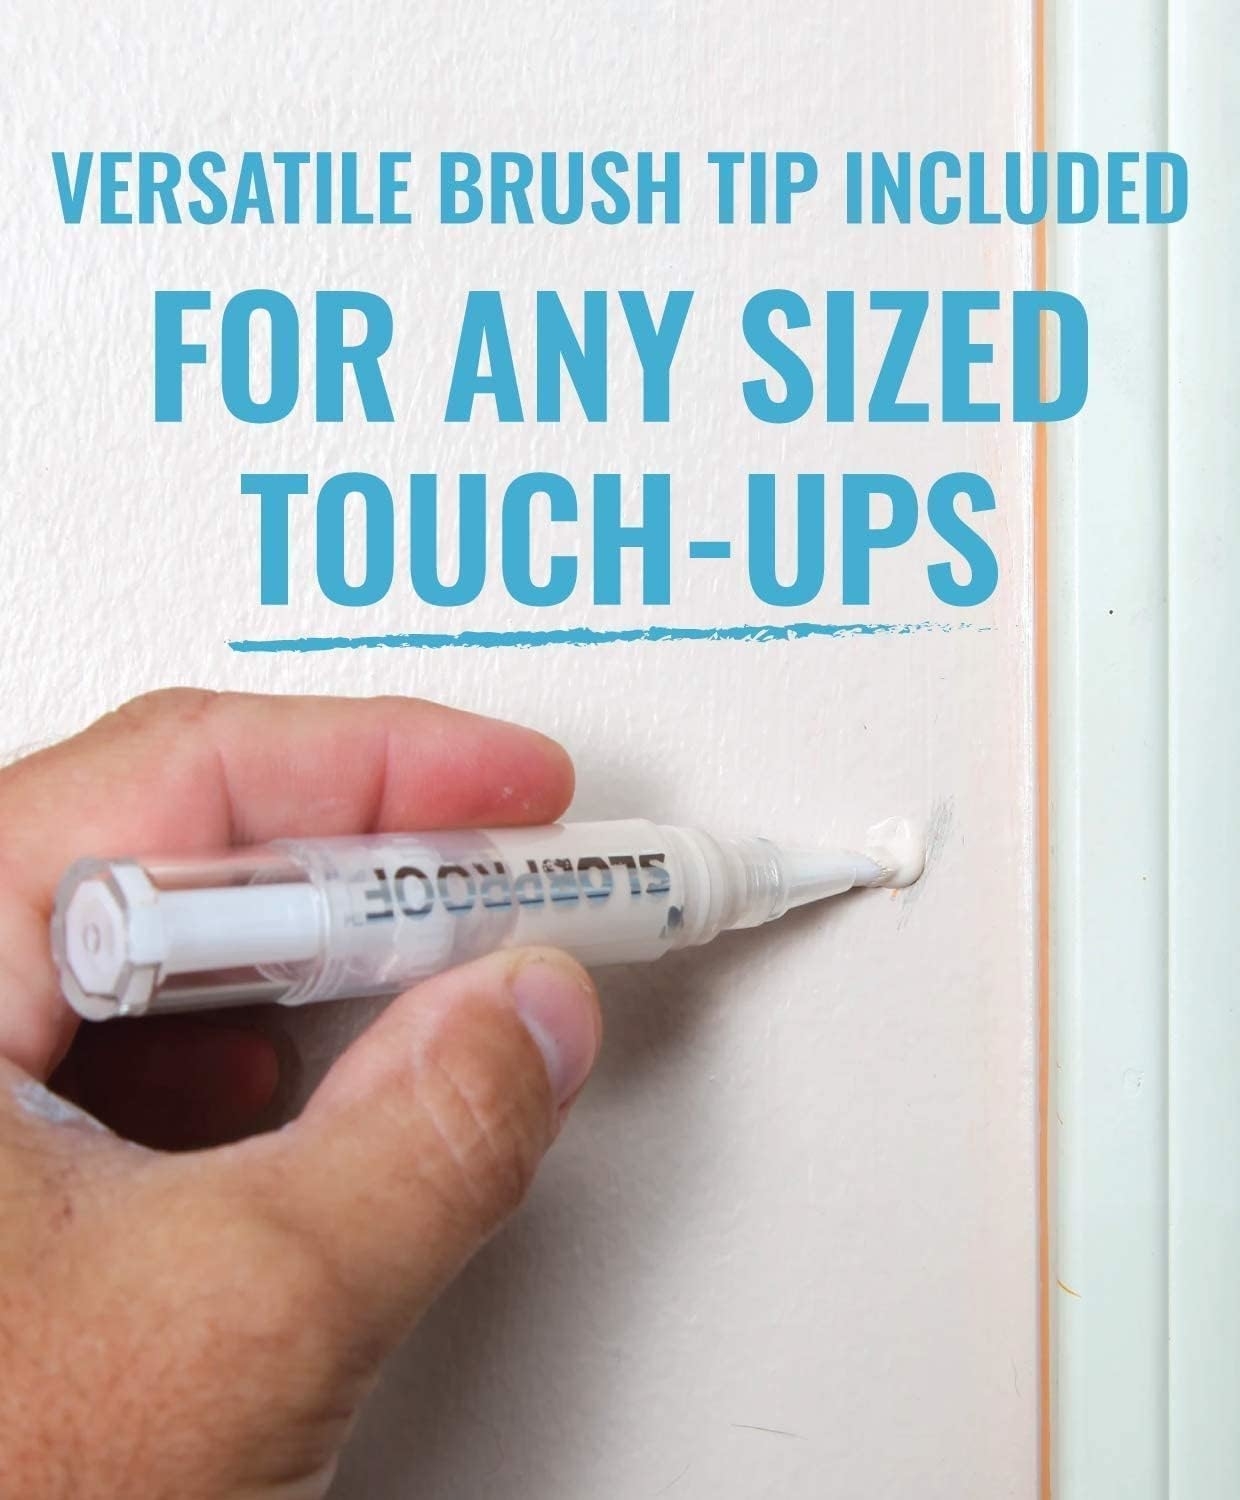 A hand using the pen to touch up a wall with text &quot;versatile brush tip included for any sized touch-ups&quot;